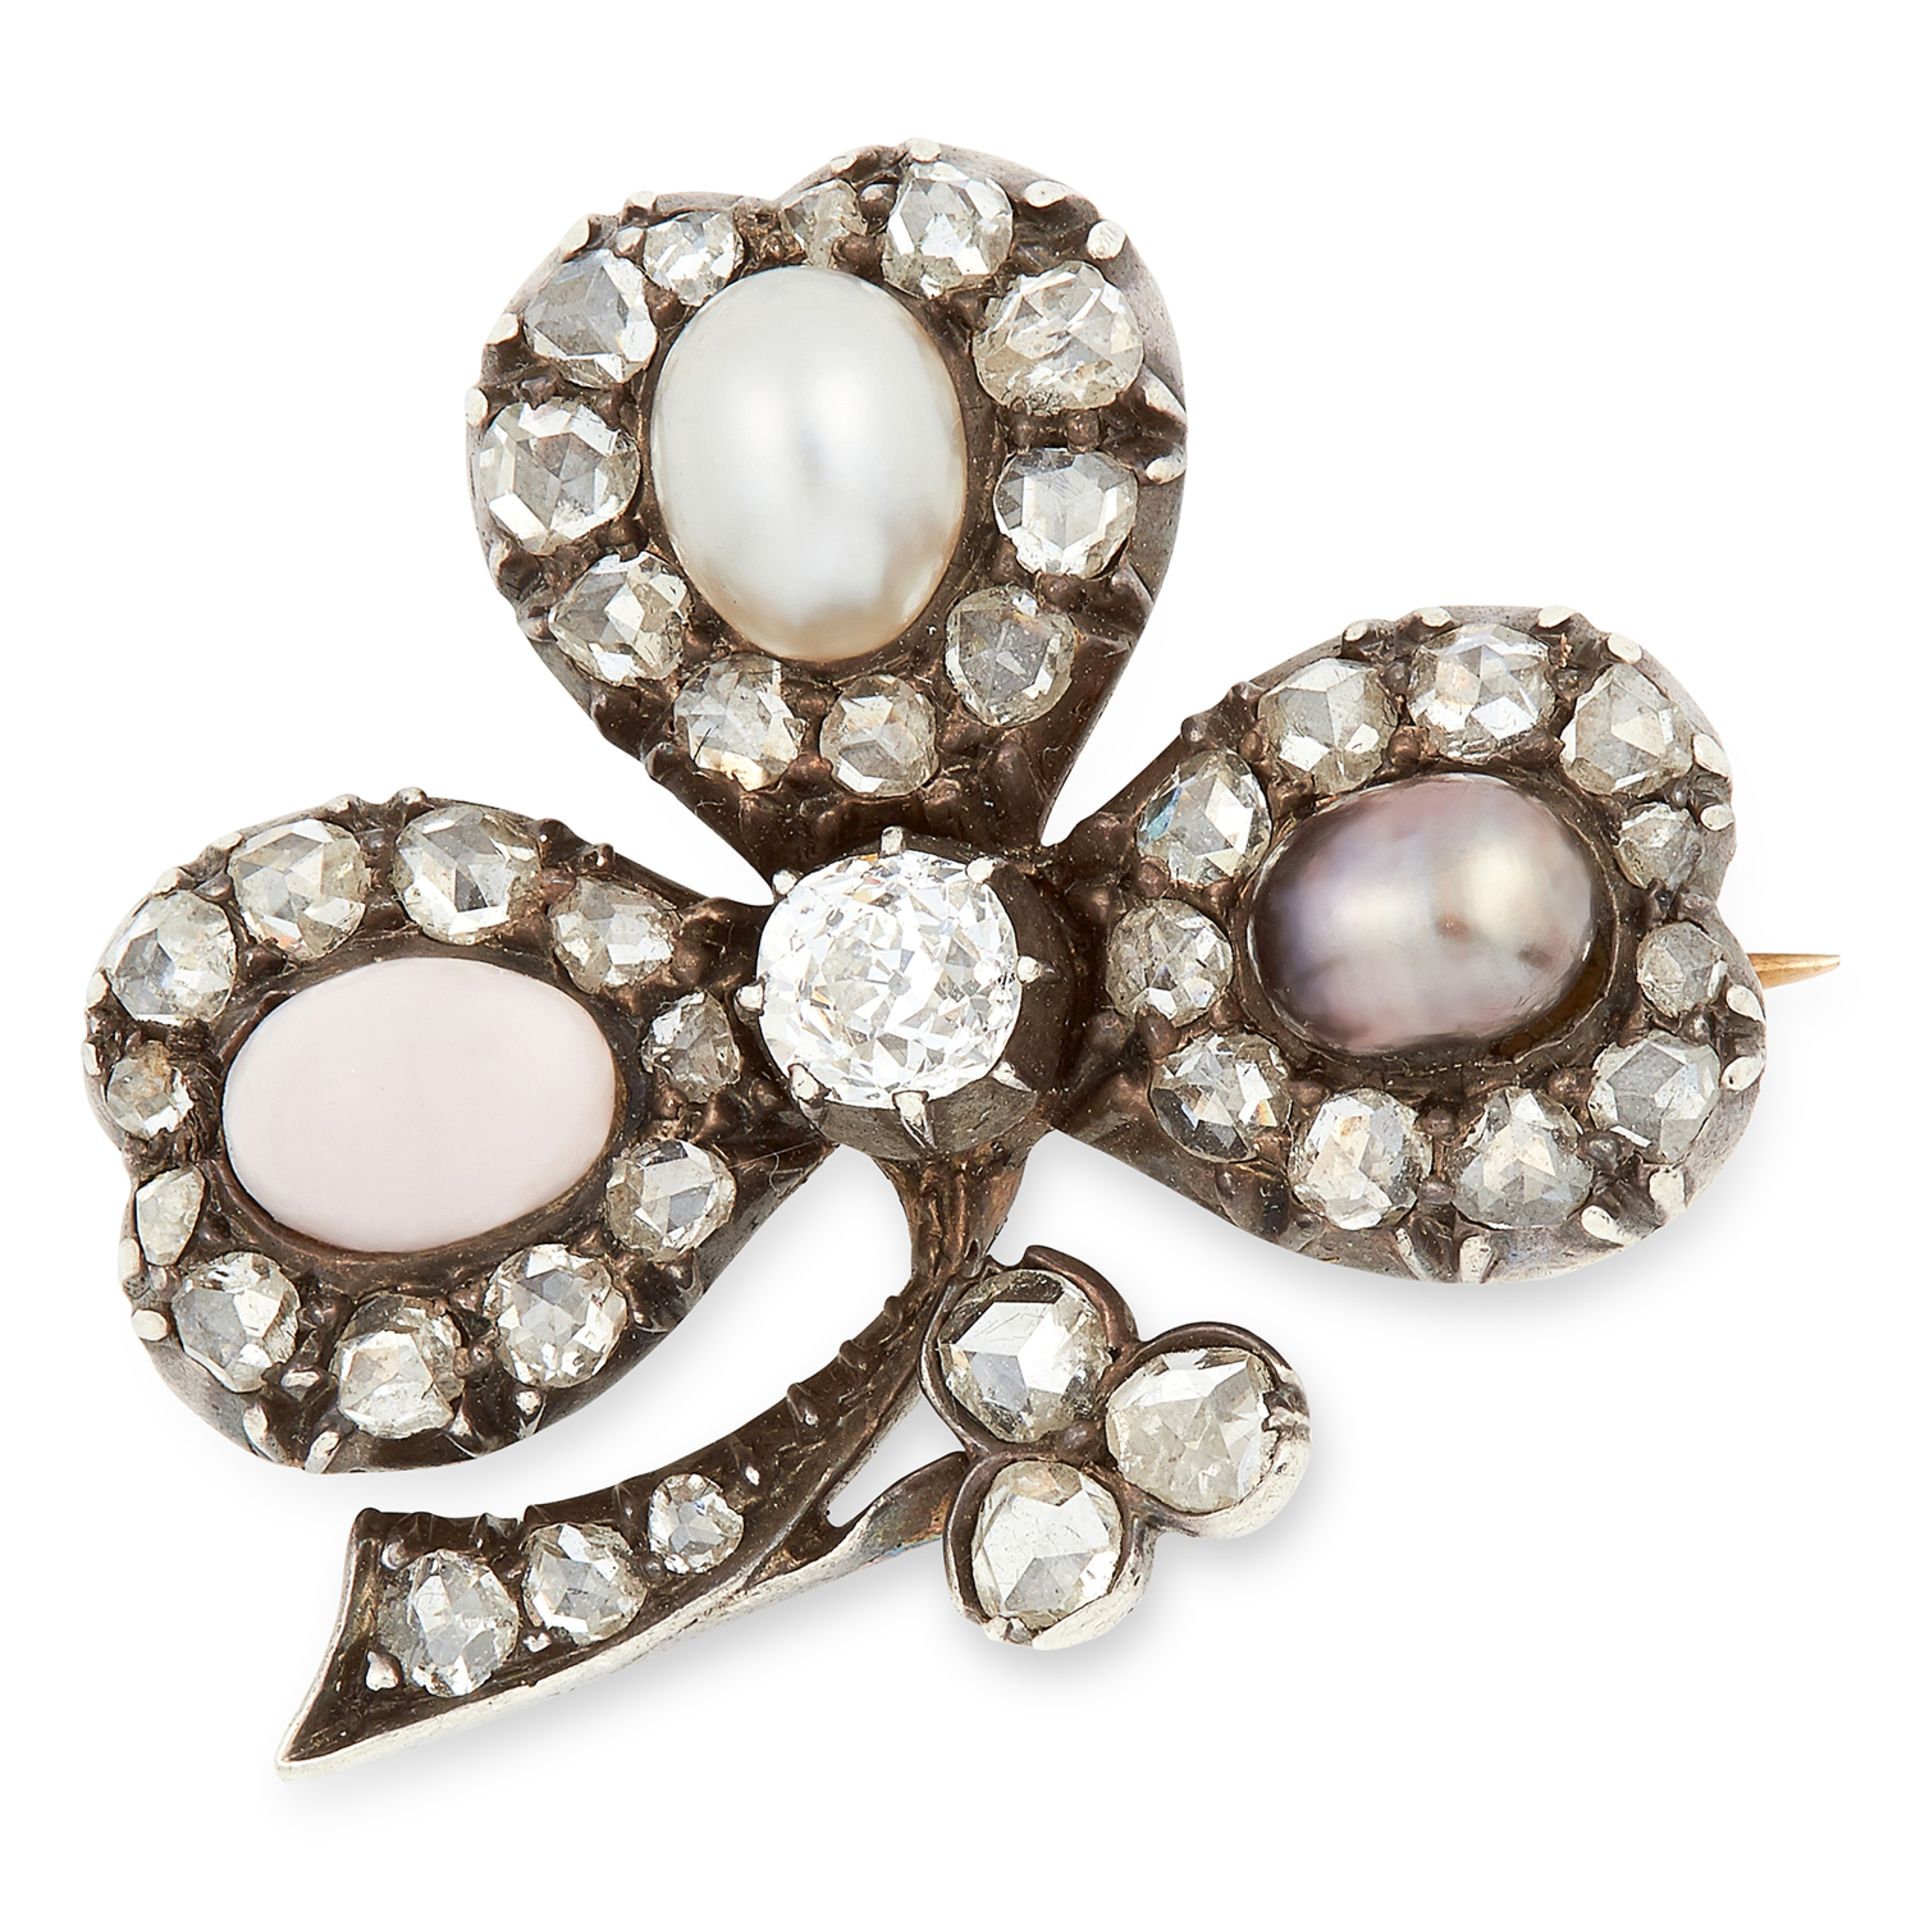 ANTIQUE PEARL, CORAL AND DIAMOND CLOVER BROOCH set with two pearls, a cabochon coral and rose cut